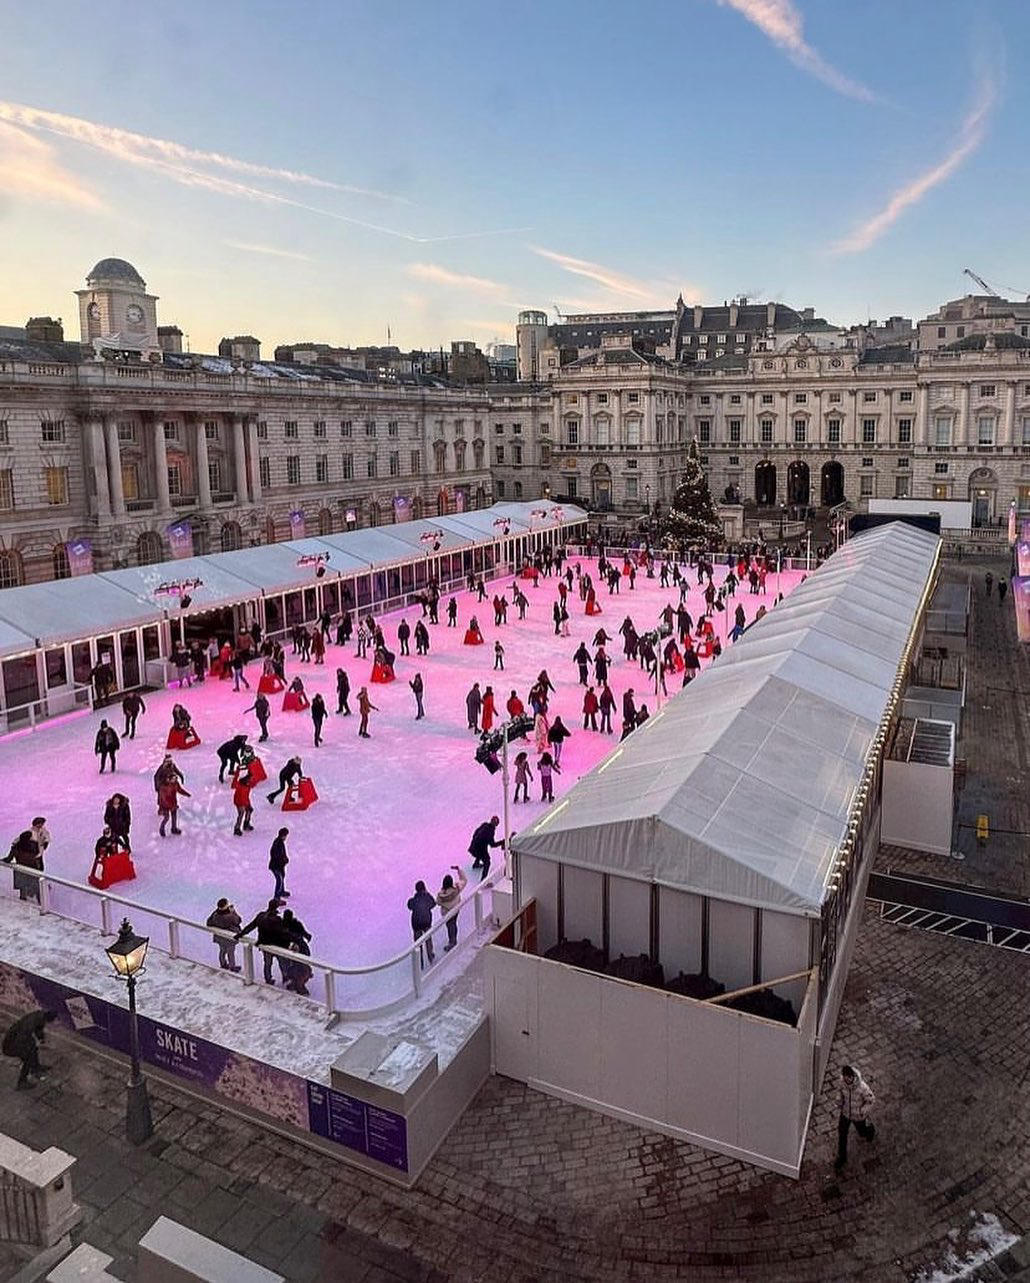 VISIT LONDON - There’s still time to get your skate on